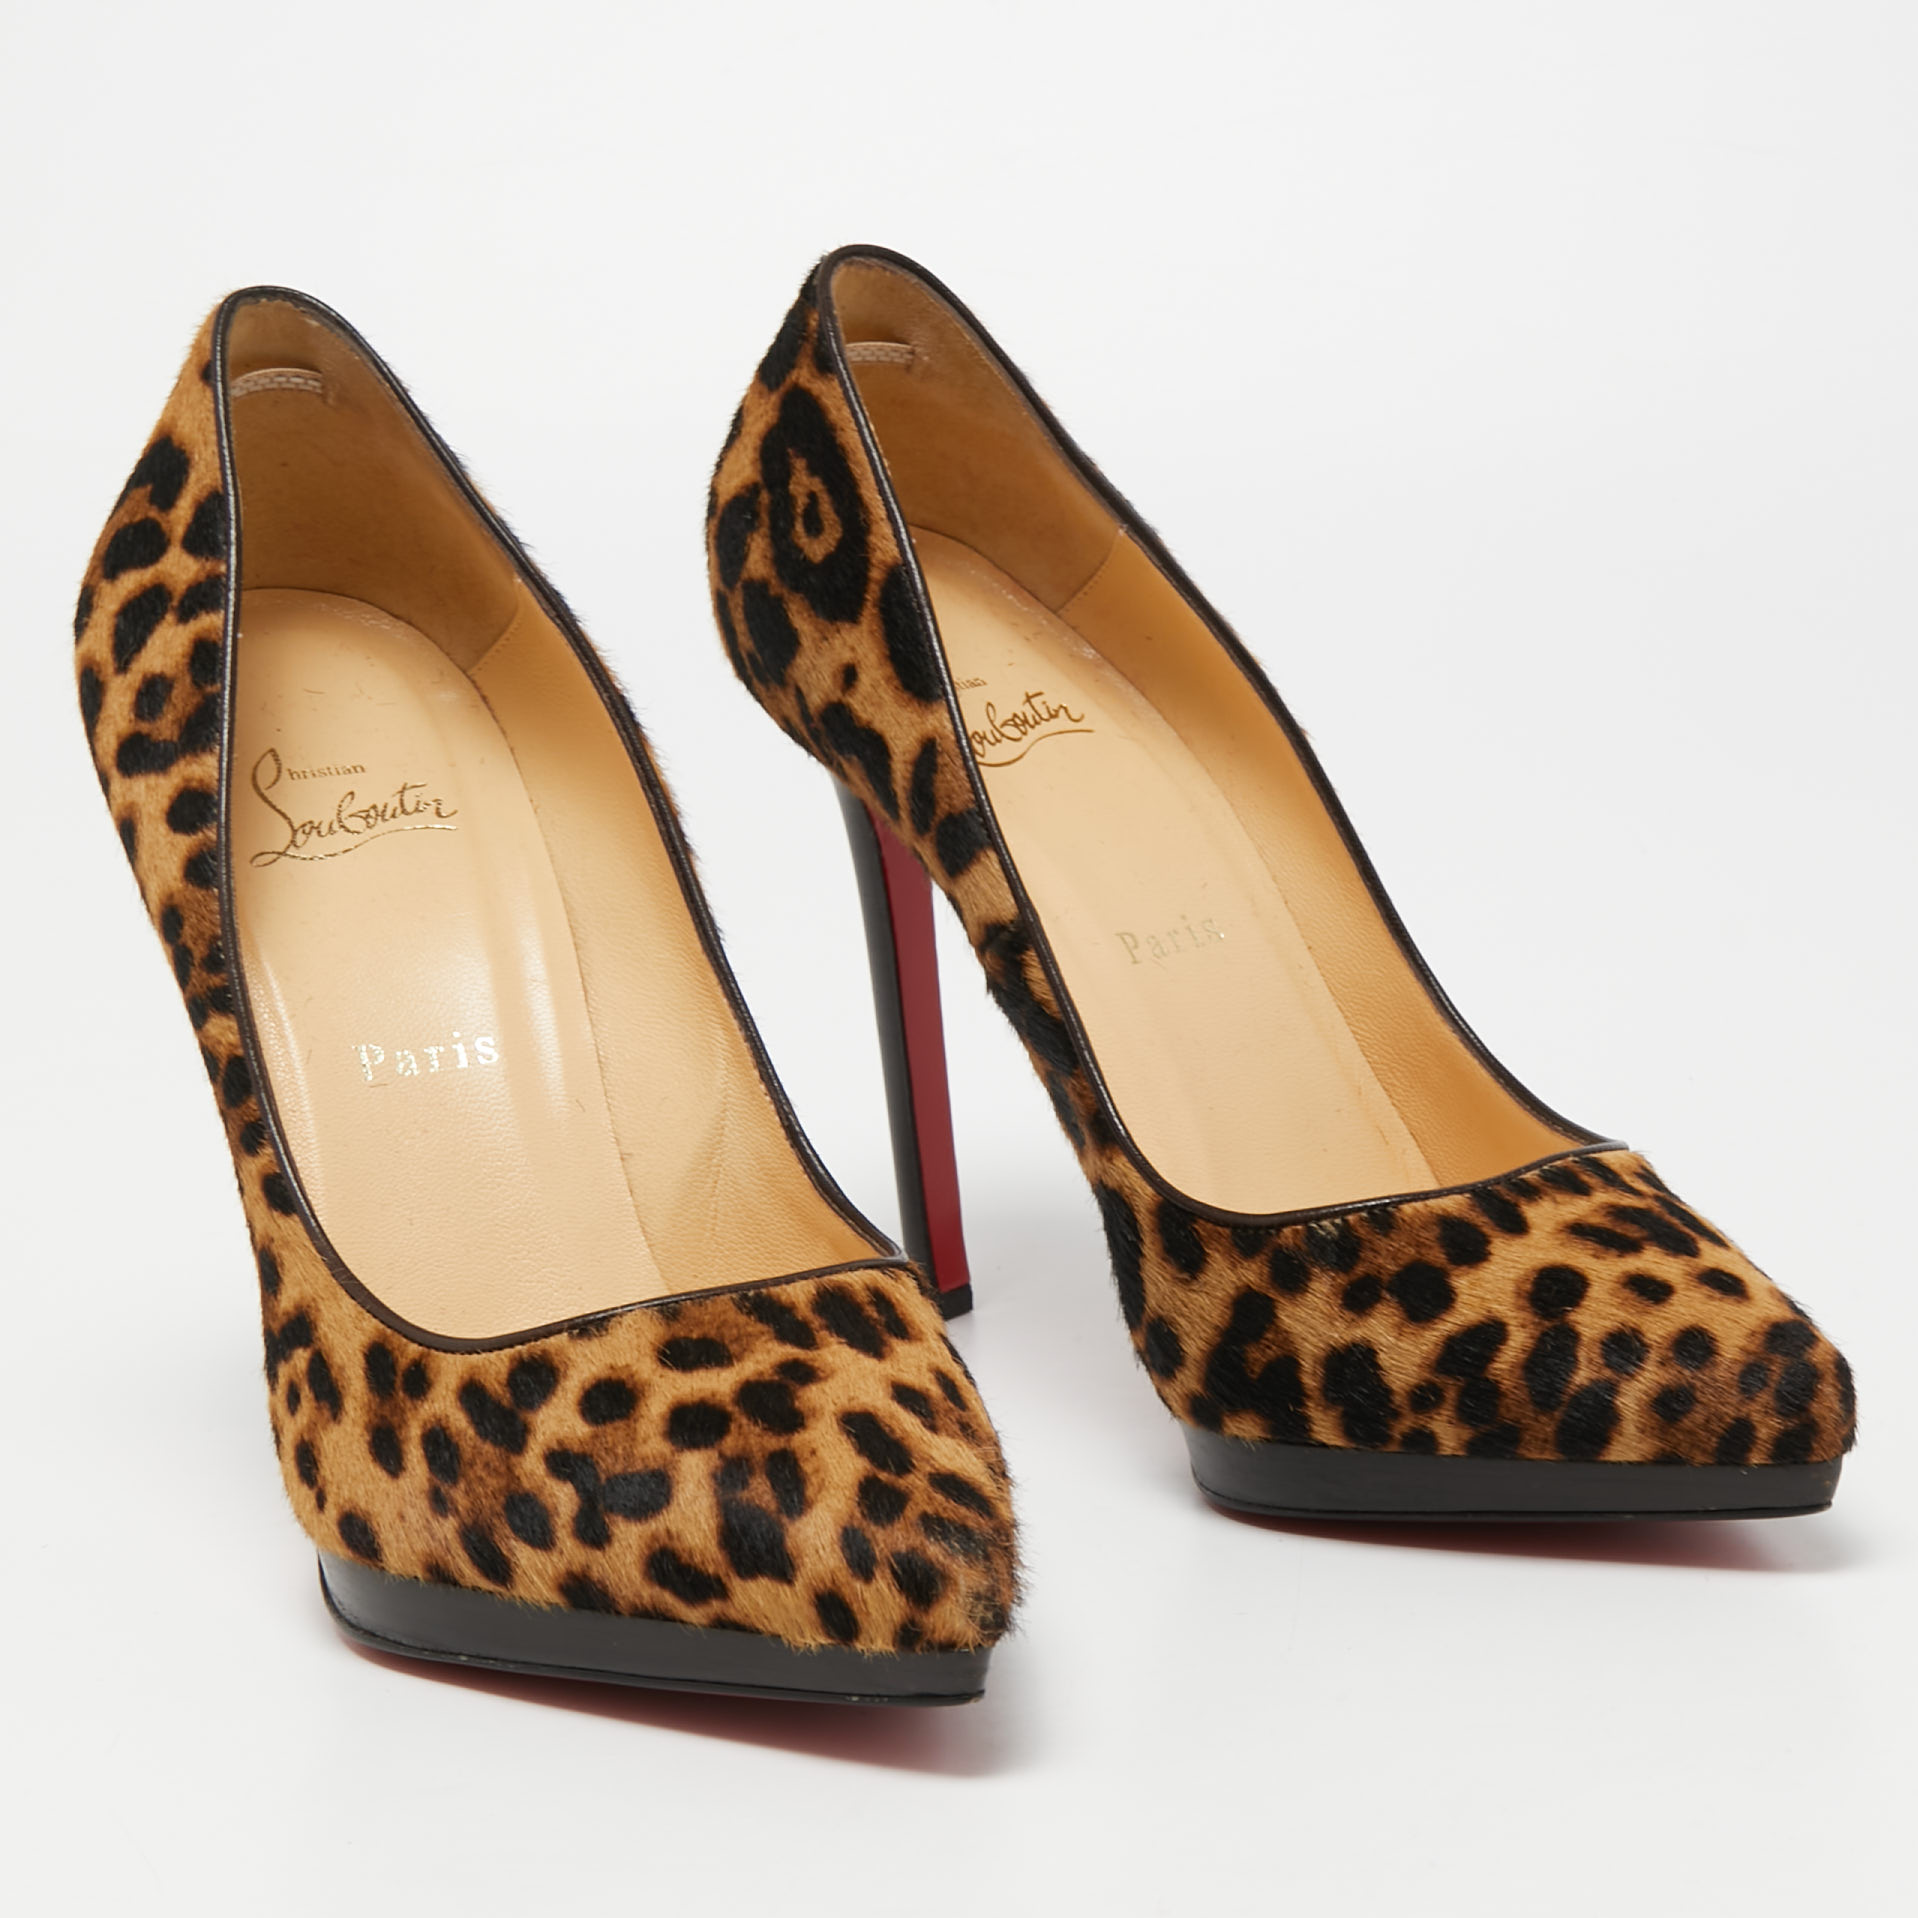 Christian Louboutin Two Tone Calf Hair Pigalle Plato Pumps Size 39.5